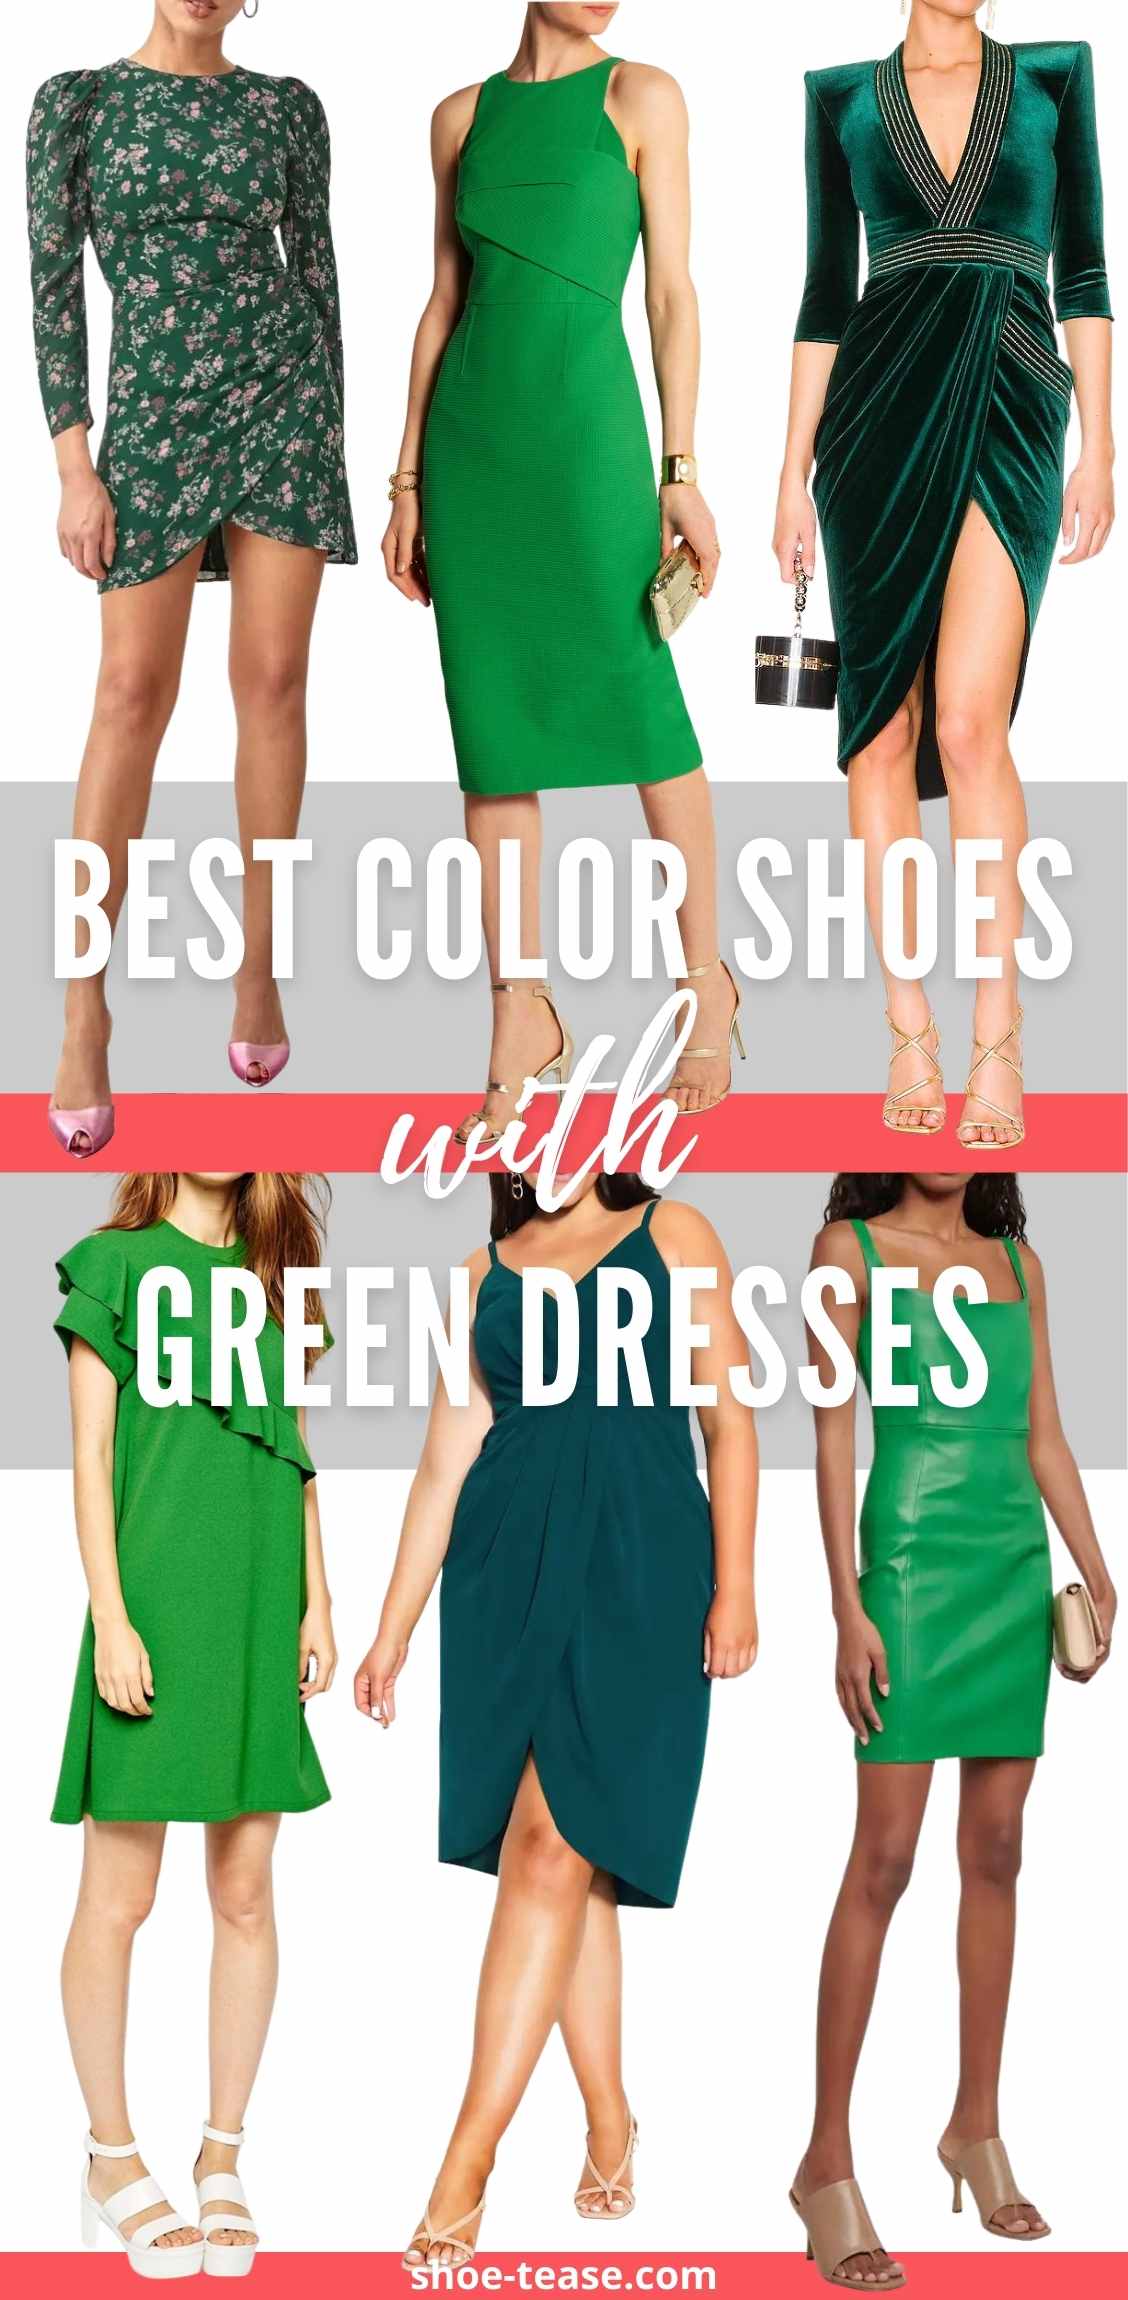 What Color Shoes To Wear With A Green Dress? 19 Cute Looks!